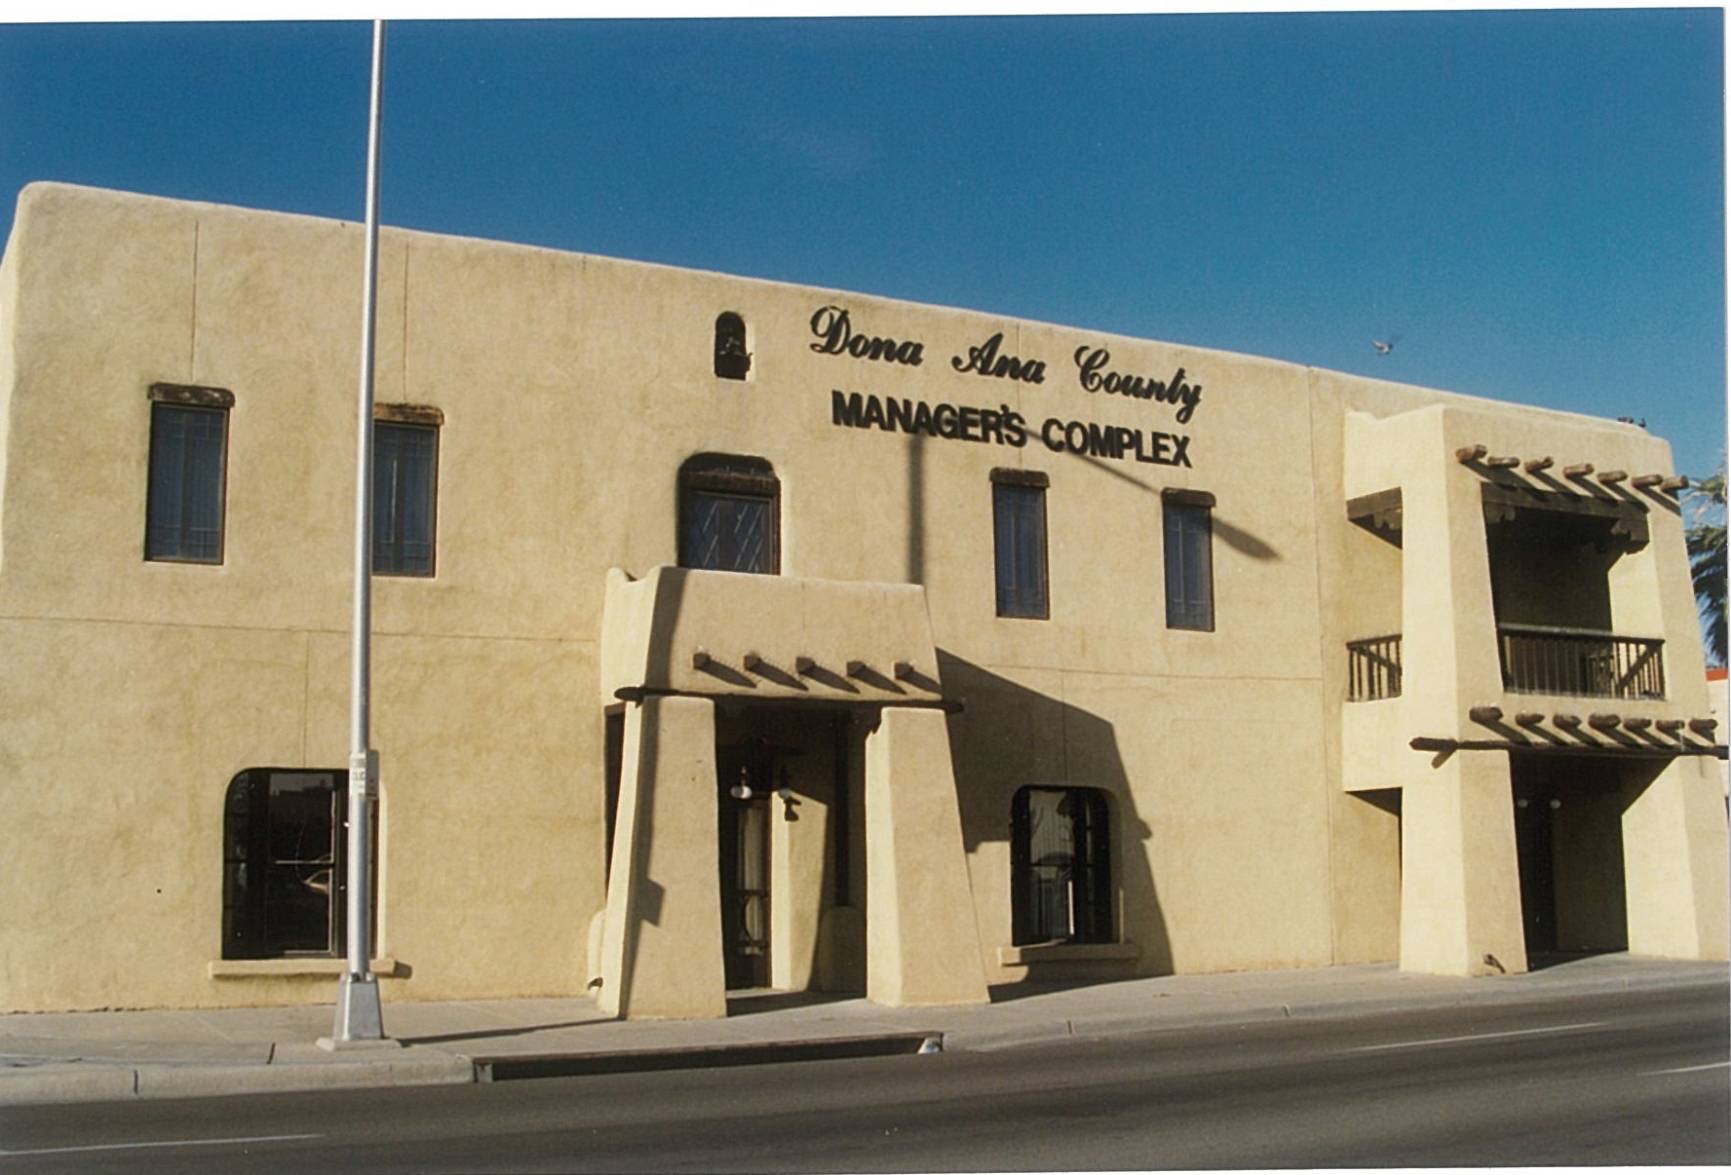 Doña Ana County Manager's Complex, 1990s